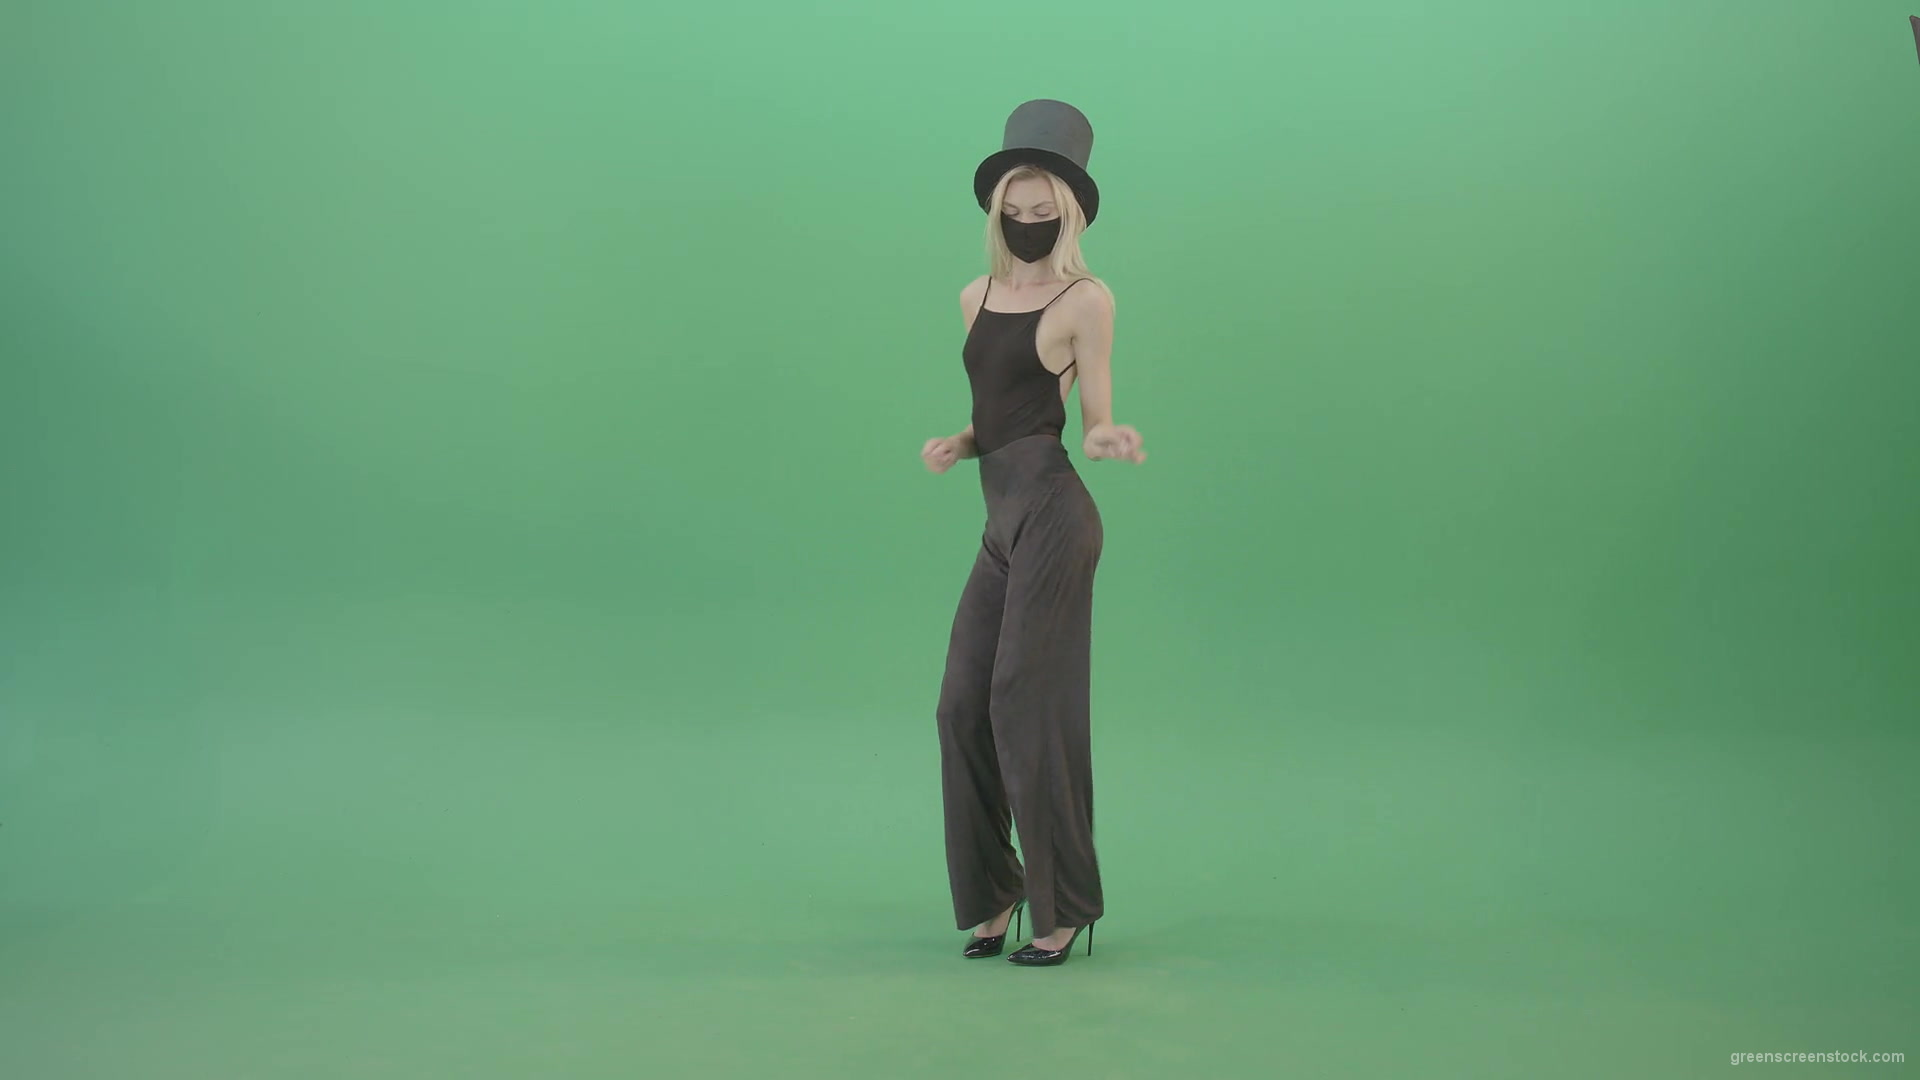 vj video background Covid-Mask-Girl-in-Black-cylinder-Hat-dancing-in-front-and-back-side-view-isolated-on-green-screen-Video-Footage-1920_003